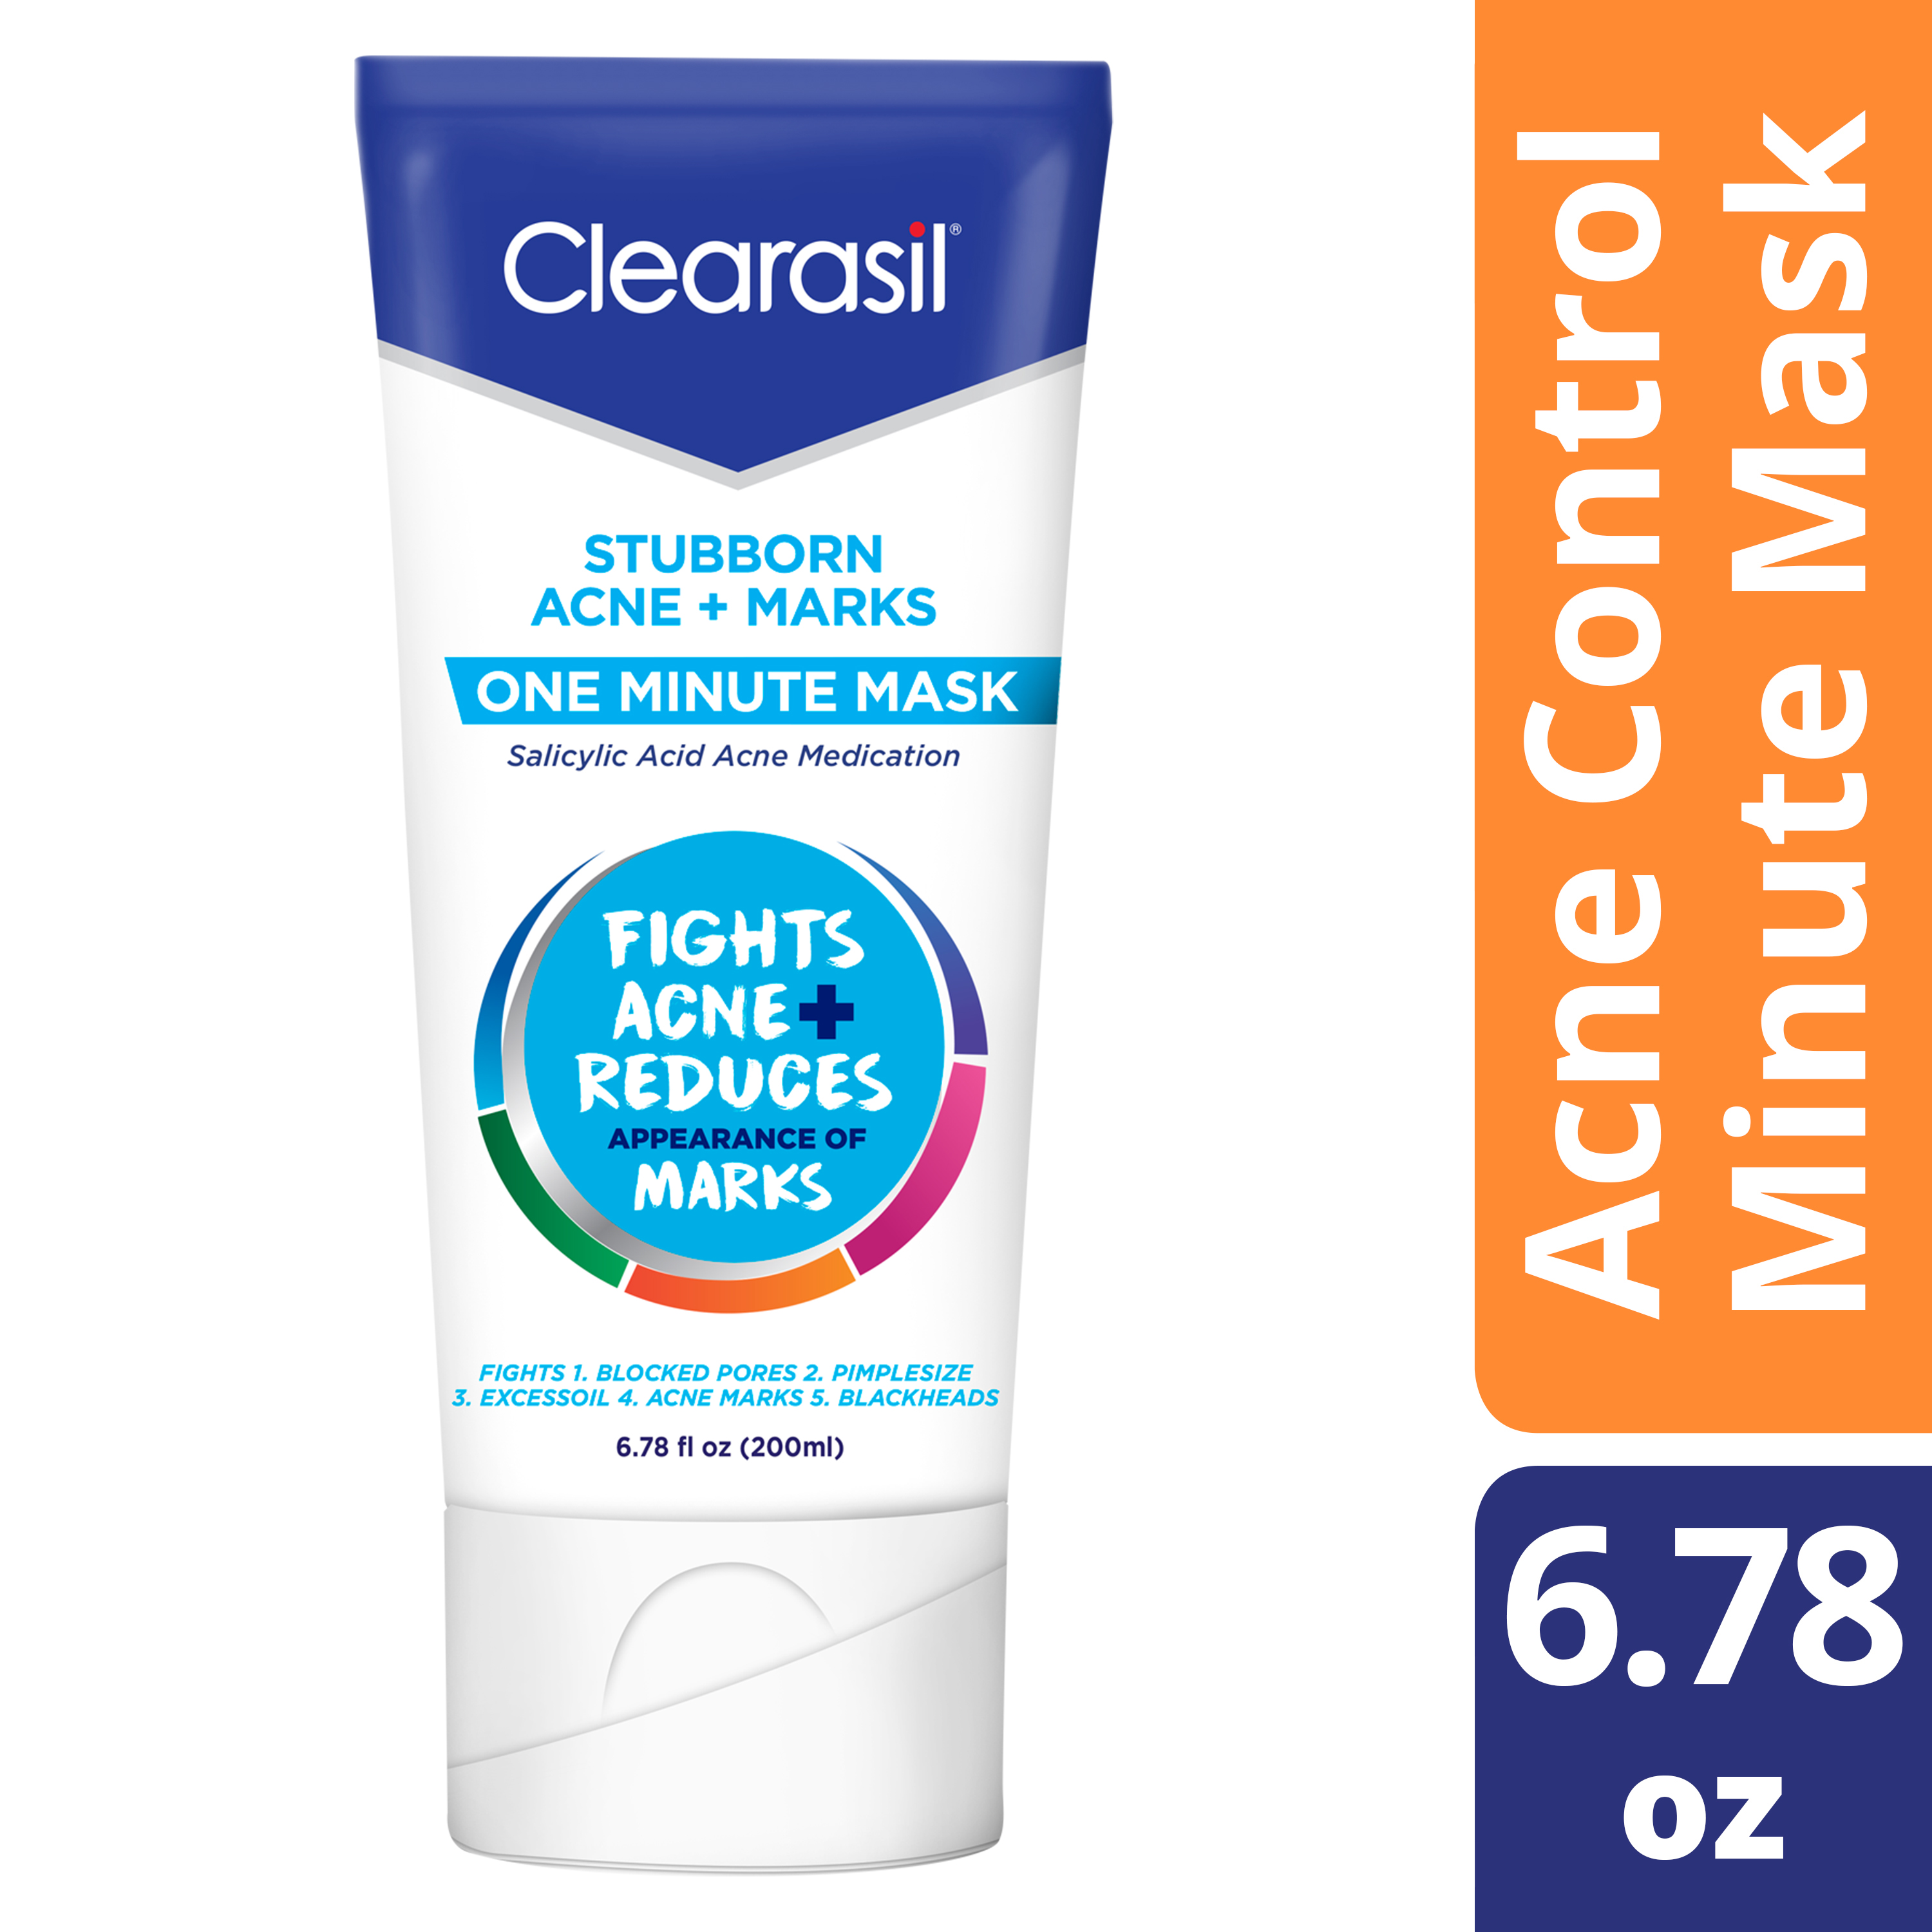 Clearasil Stubborn Acne One Minute Face Mask, 6.78 oz - image 1 of 12